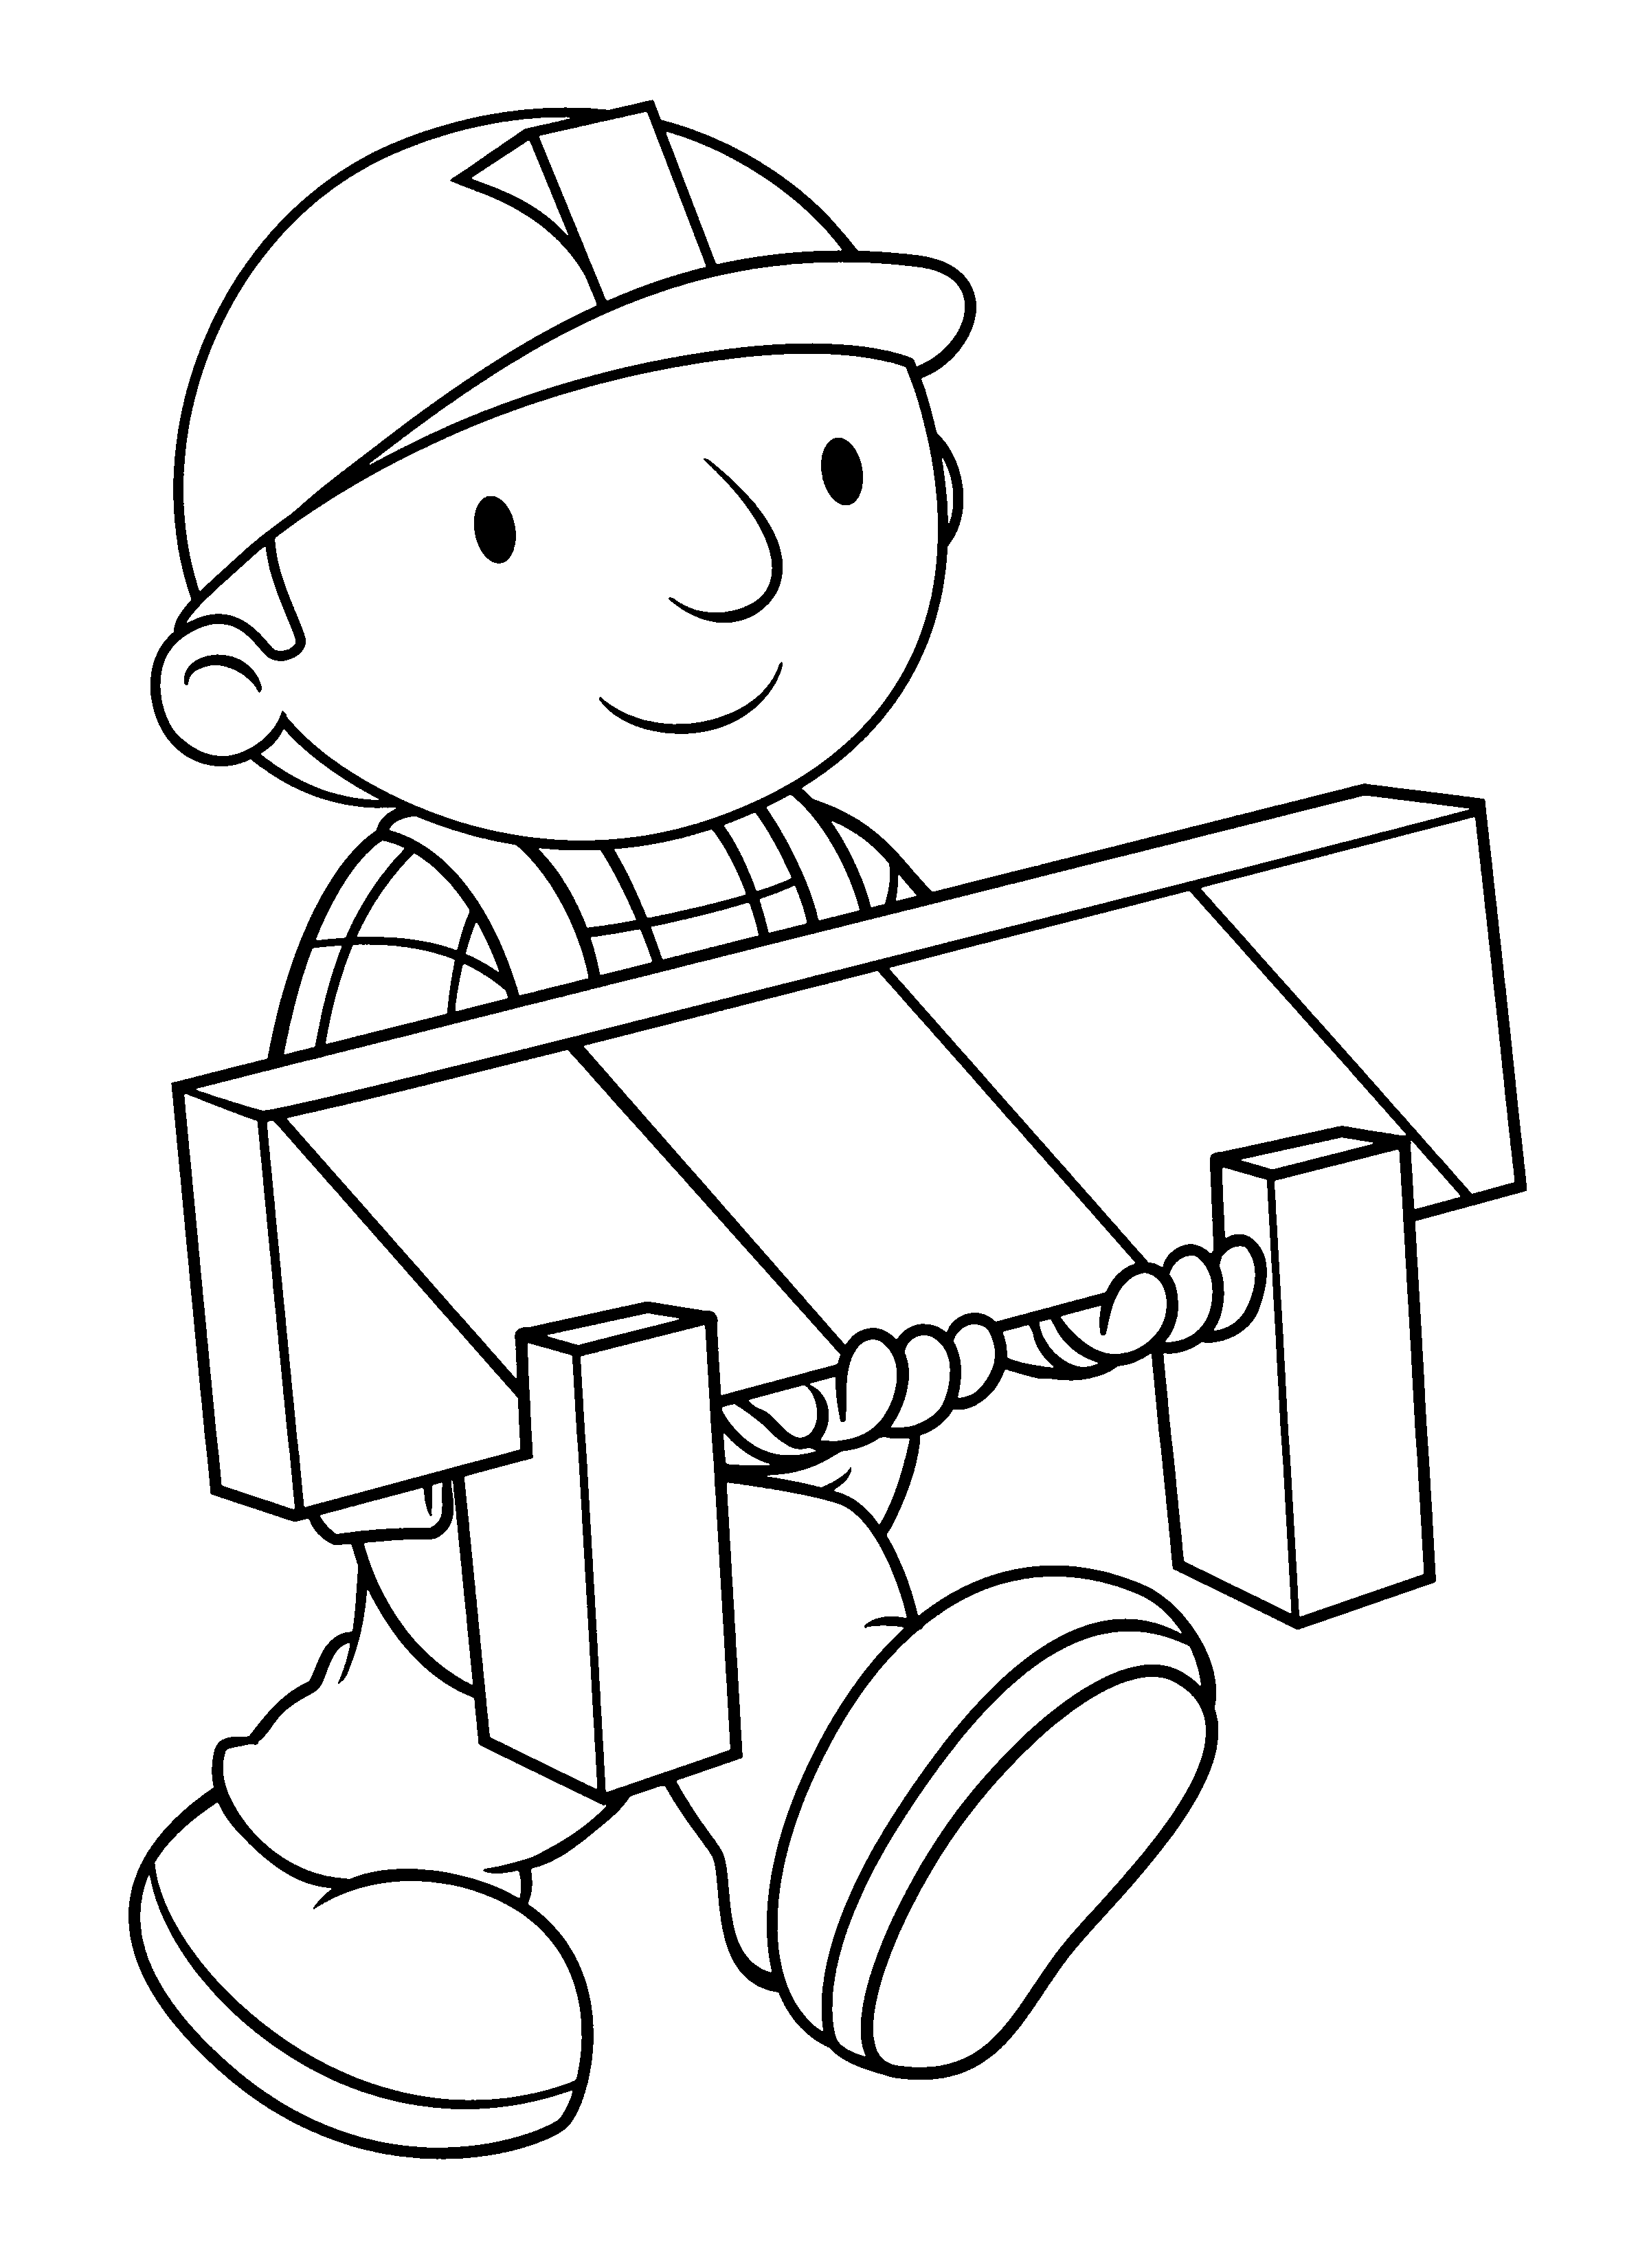 Bob The Builder To Color For Kids Bob The Builder Kids Coloring Pages ...